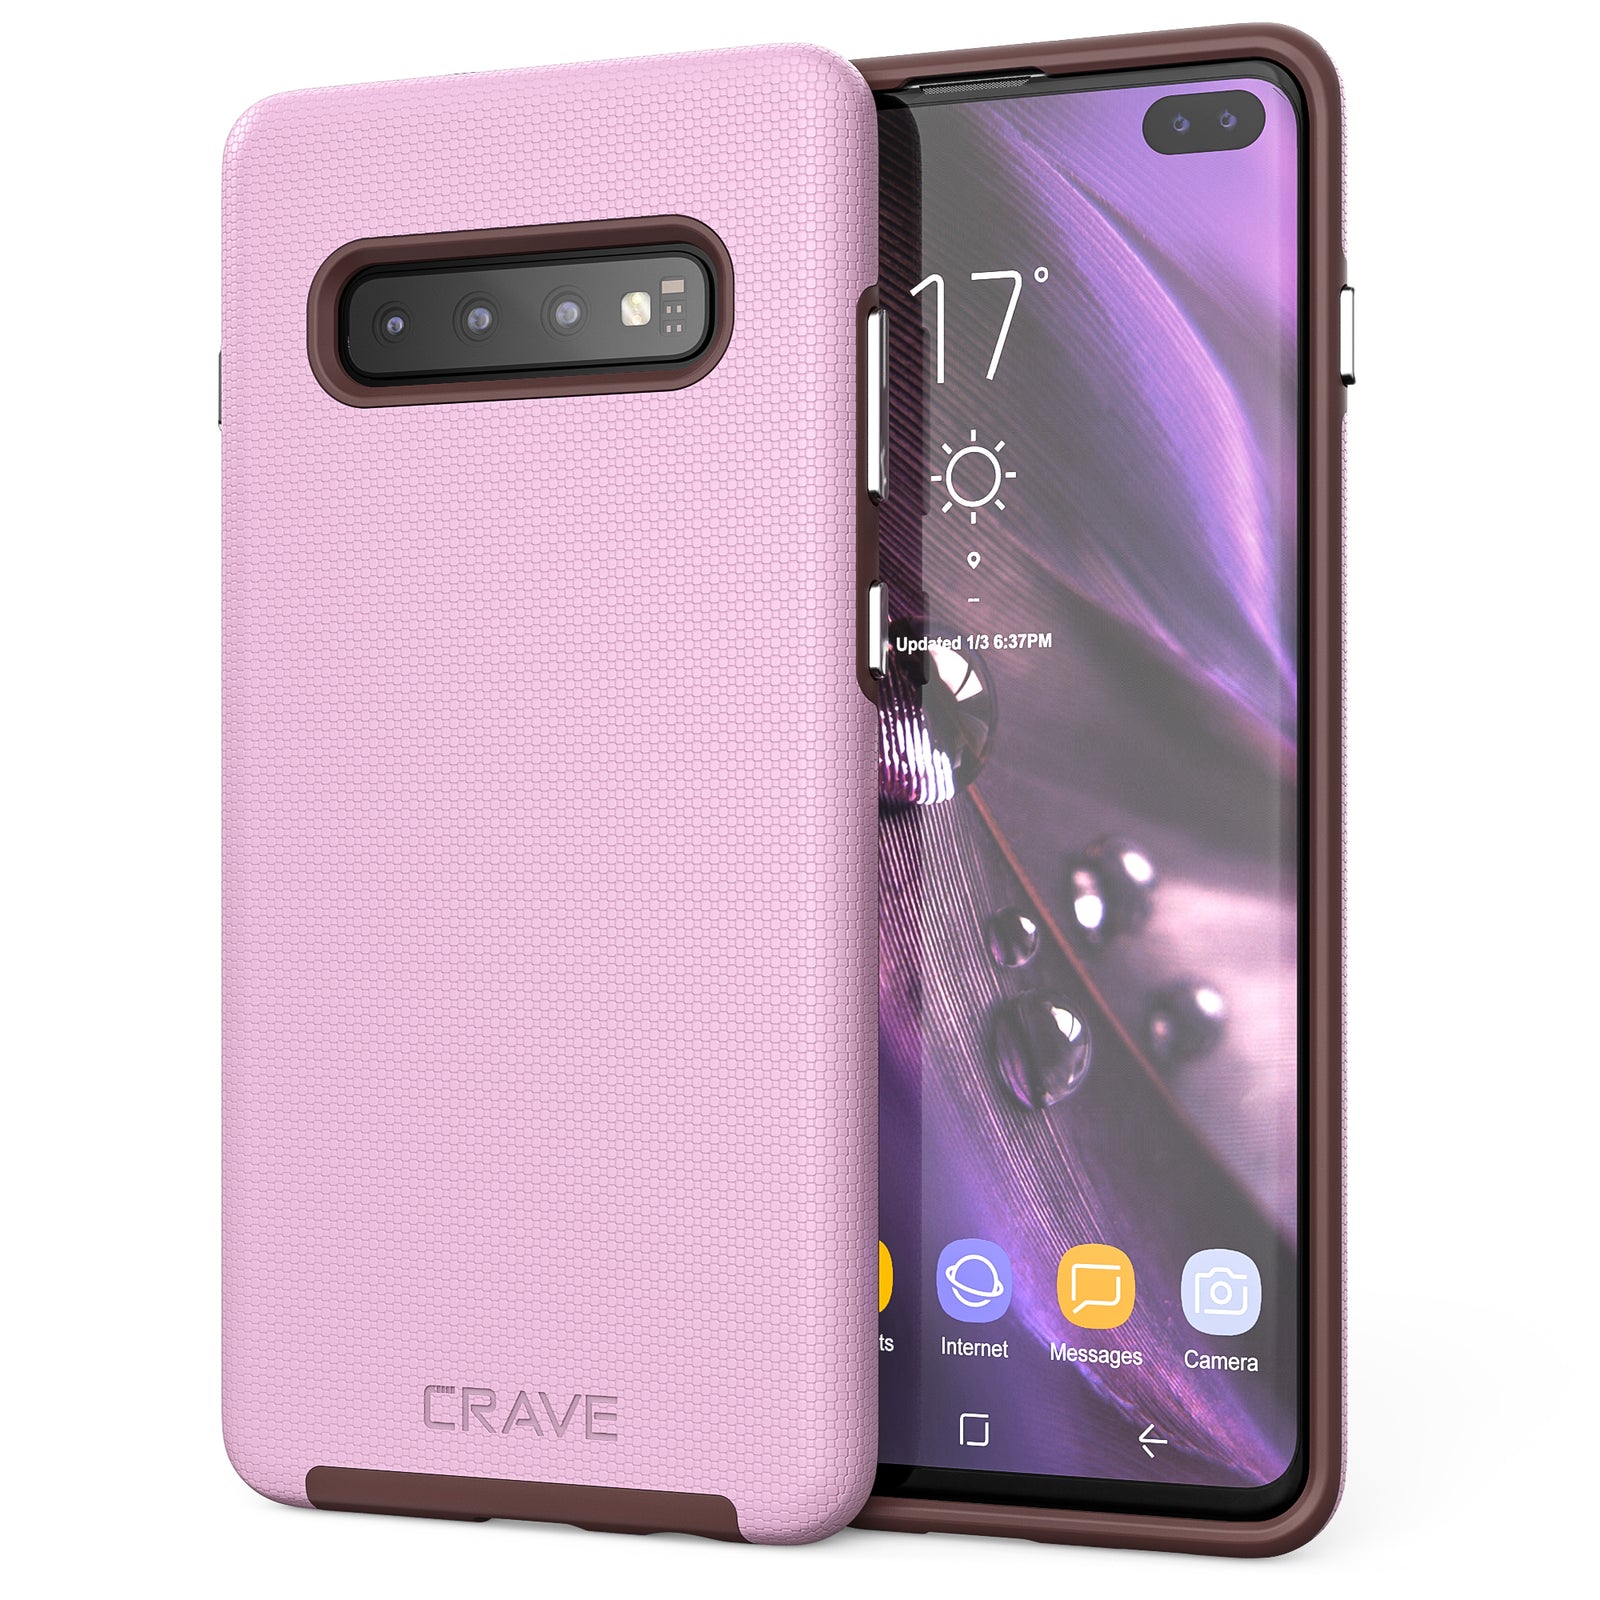 Samsung Galaxy S10 Plus Cases - Crave Direct